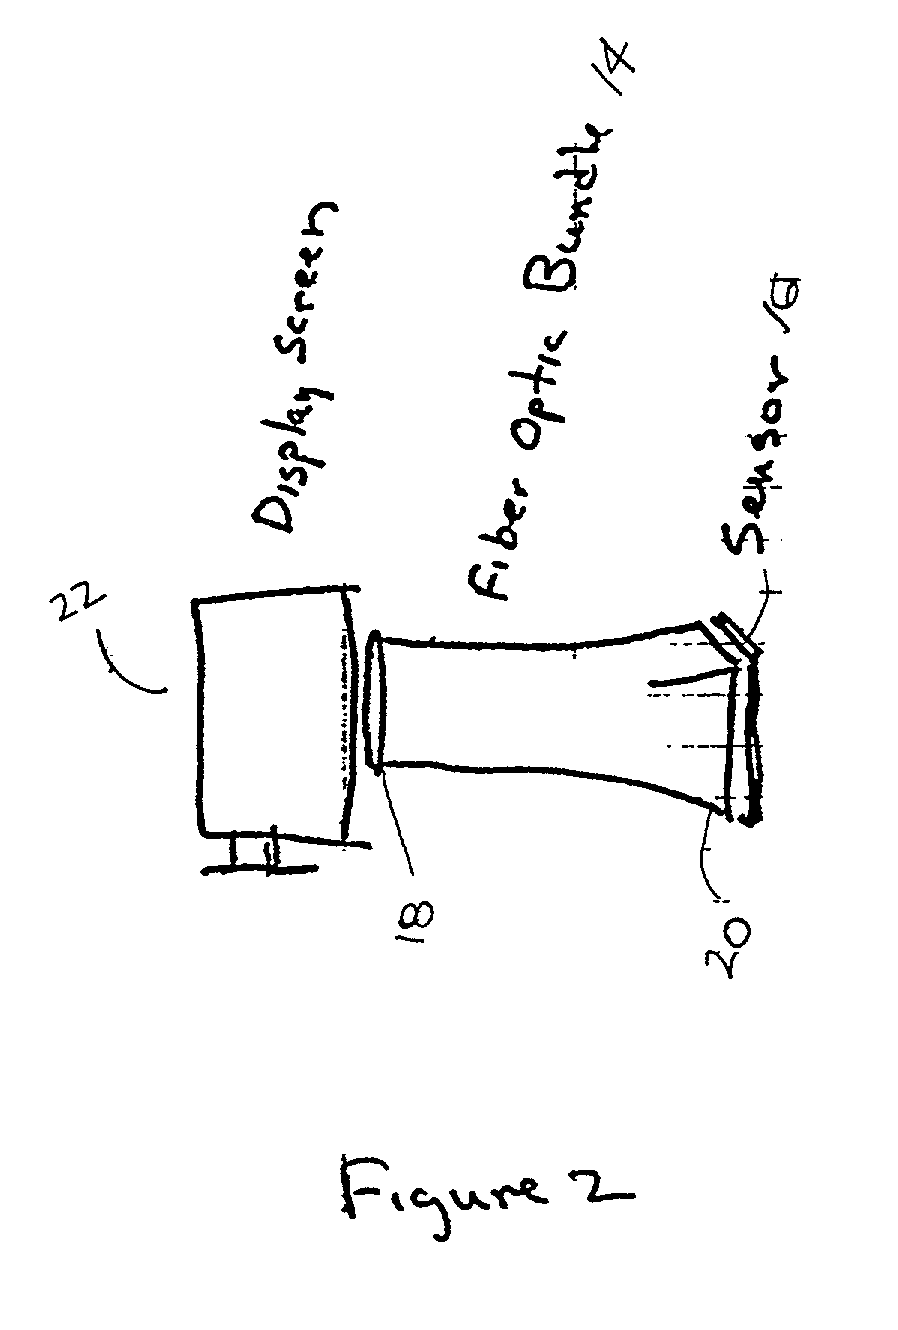 Fiber optic image mapping apparatus and method